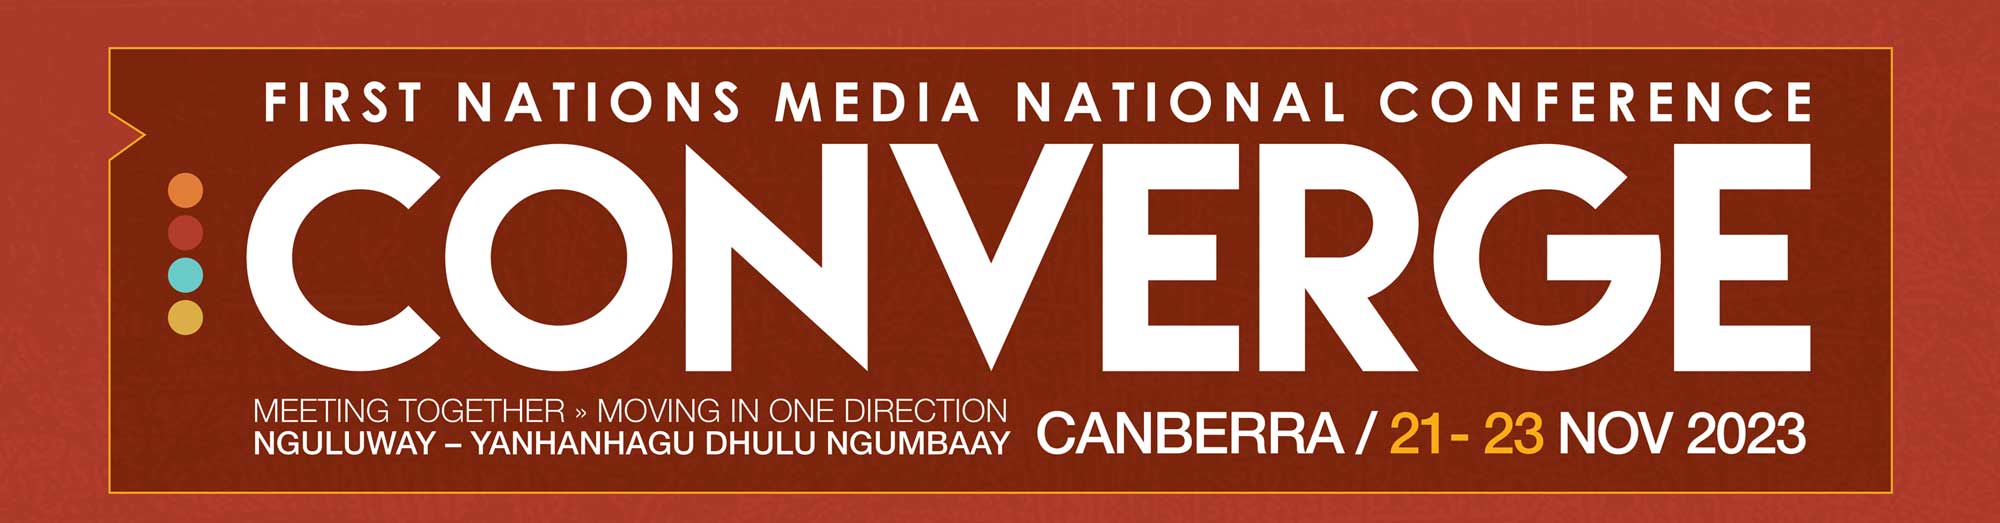 First Nations Media Converge Banner